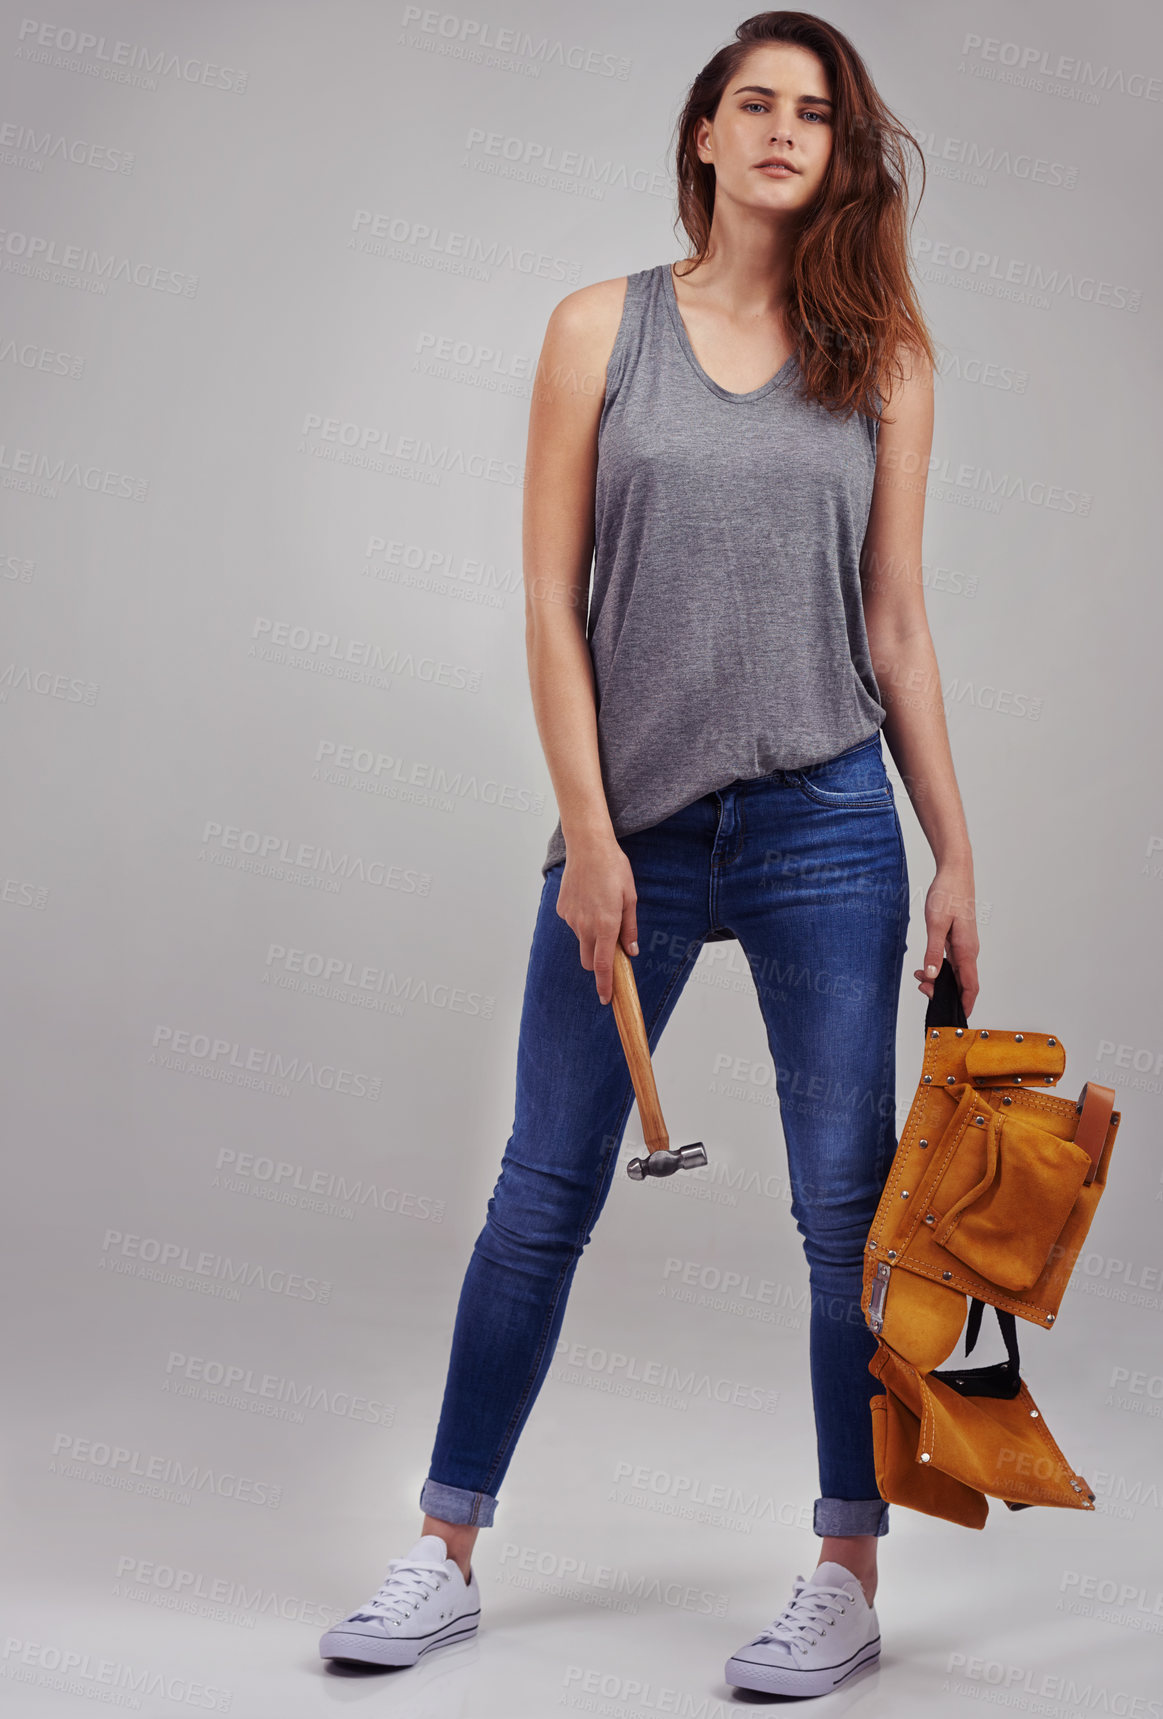 Buy stock photo Full length studio portrait of casually-dressed young woman holding a hammer and tool belt